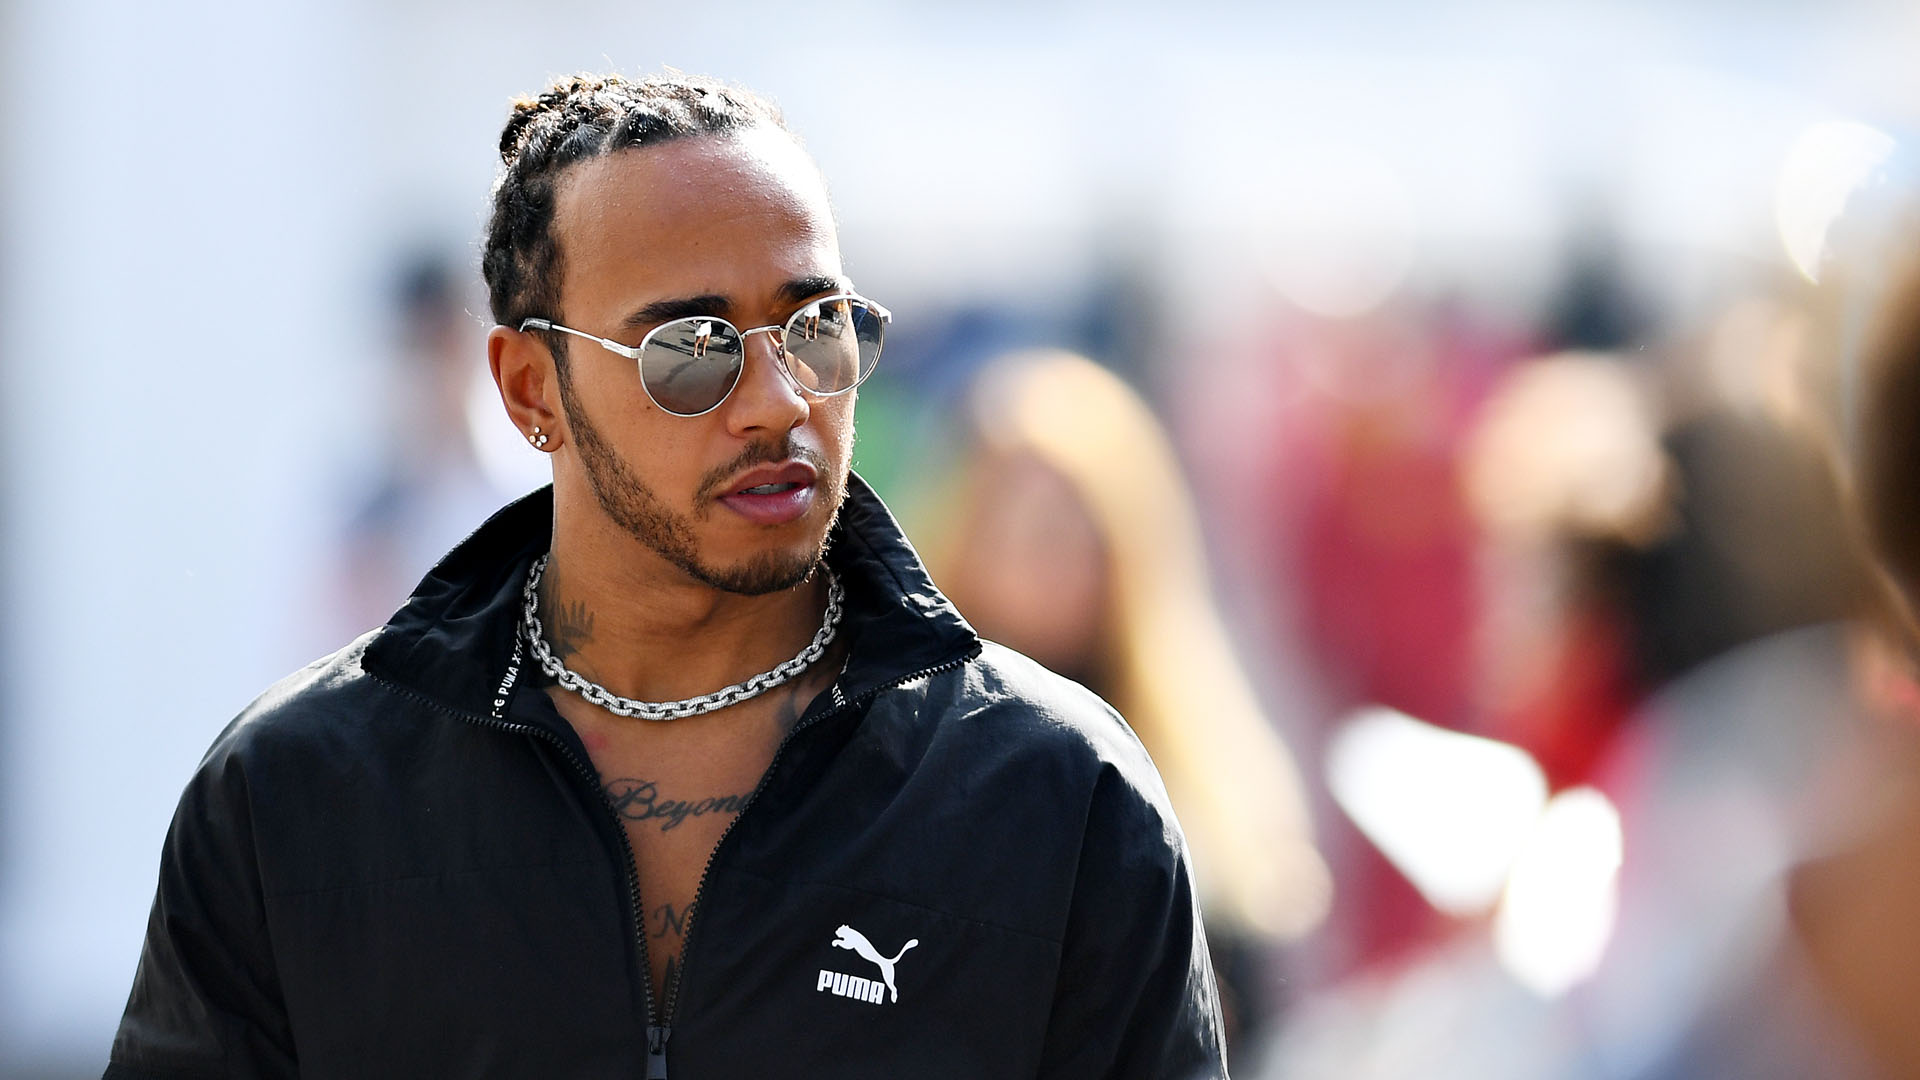 Lewis Hamilton is not approachable as he used to be